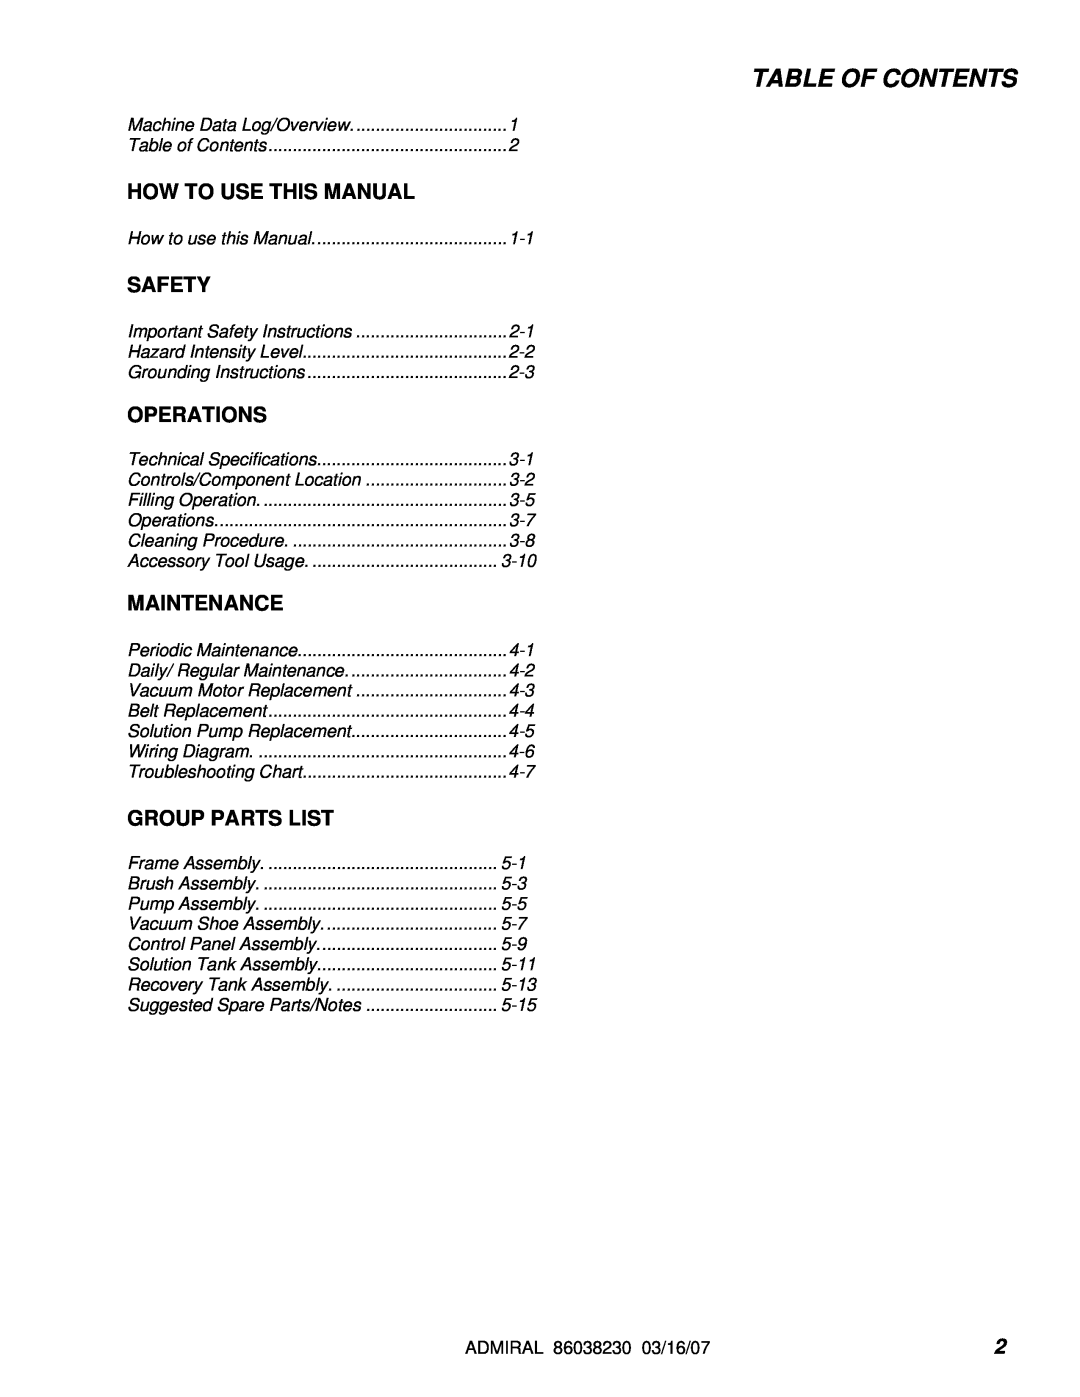 Windsor 10080170, ADM8 Table Of Contents, How To Use This Manual, Safety, Operations, Maintenance, Group Parts List 